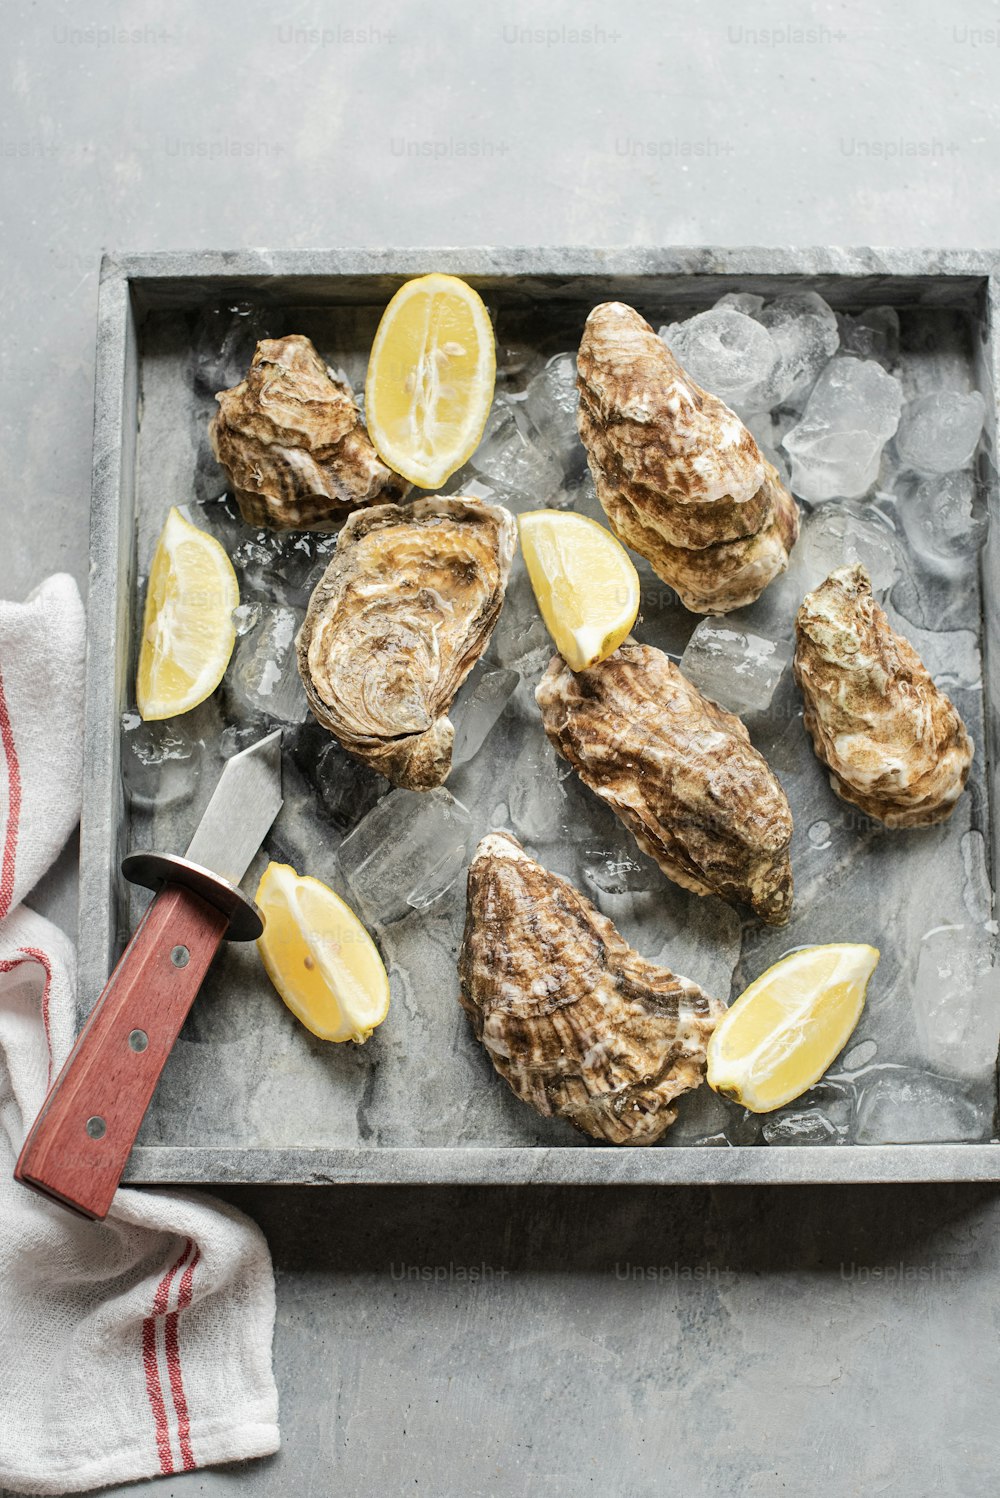 a tray of oysters with lemon slices and a knife